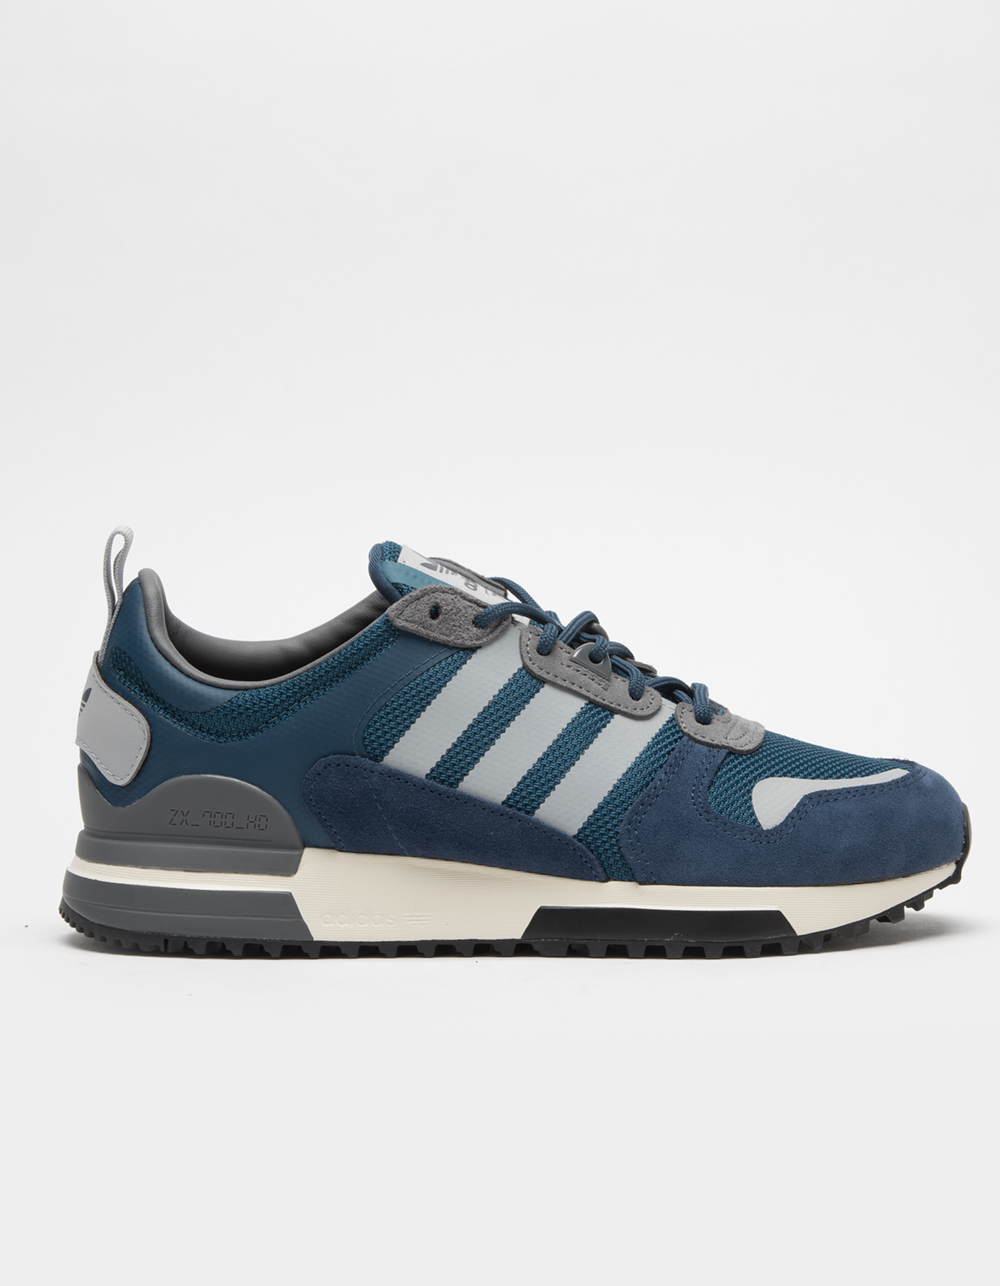 ADIDAS ZX 700 HD Shoes - NAVY COMBO | Tillys